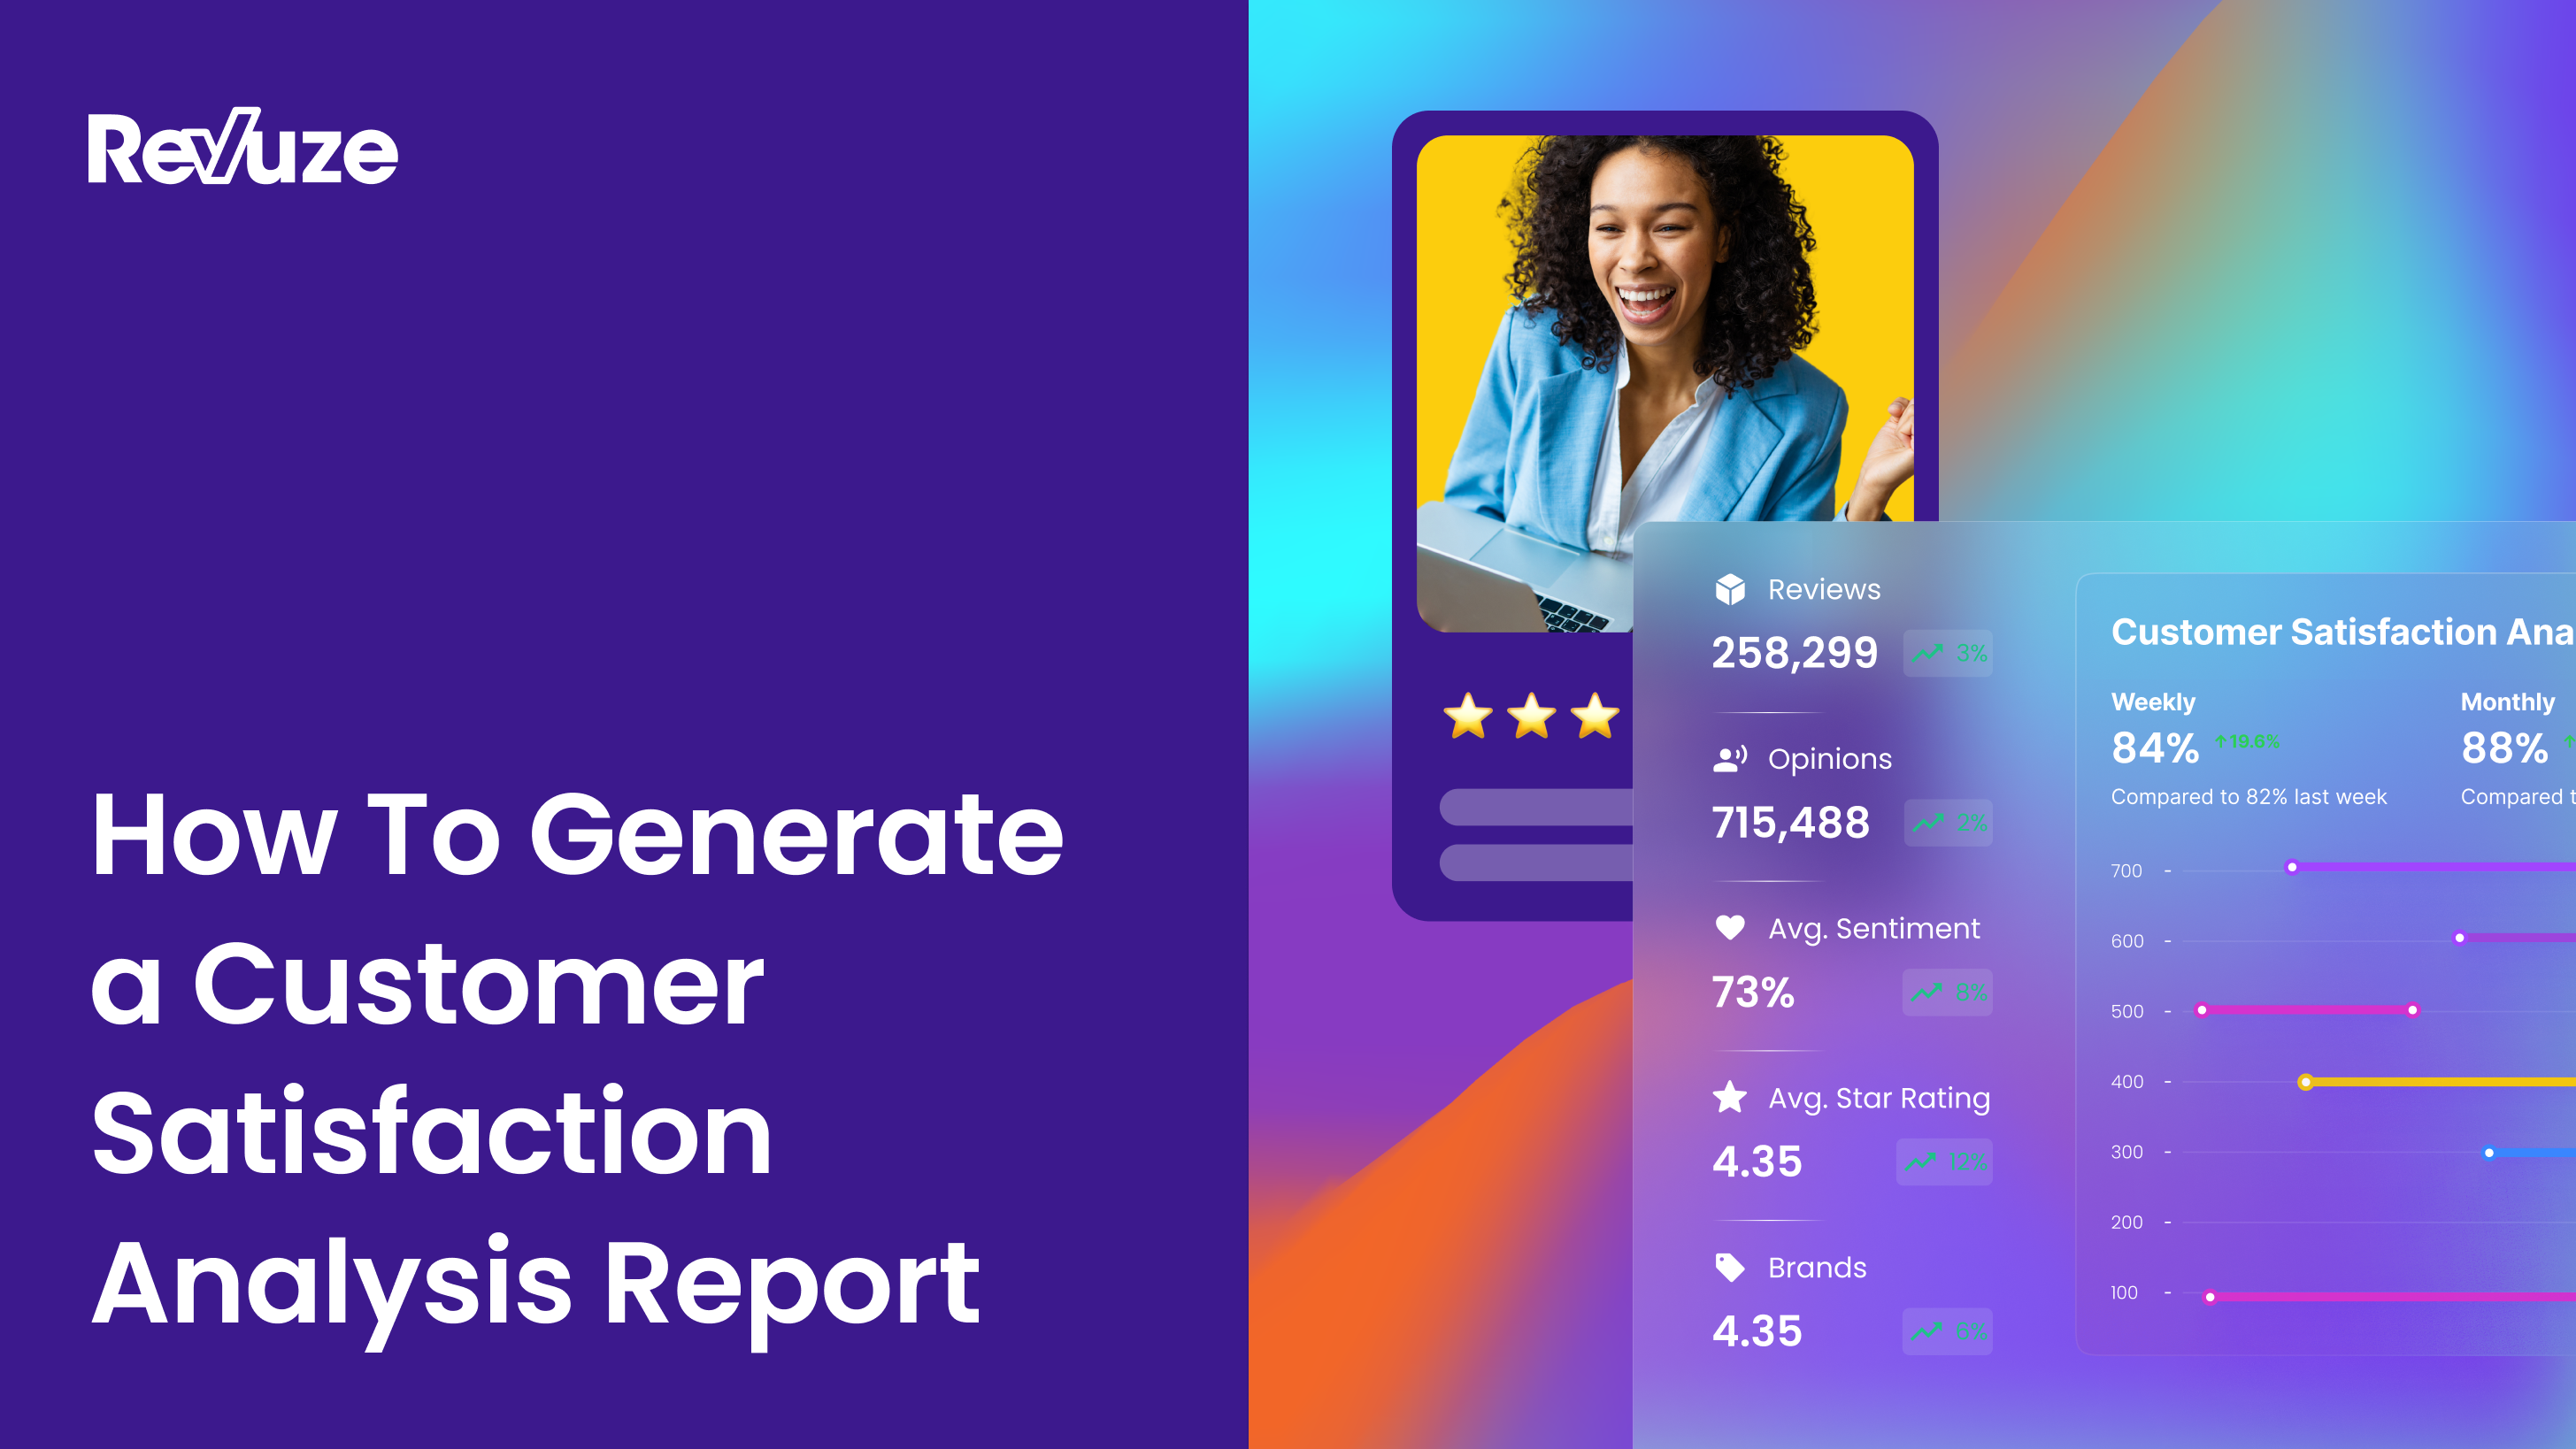 How To Generate a Customer Satisfaction Analysis Report